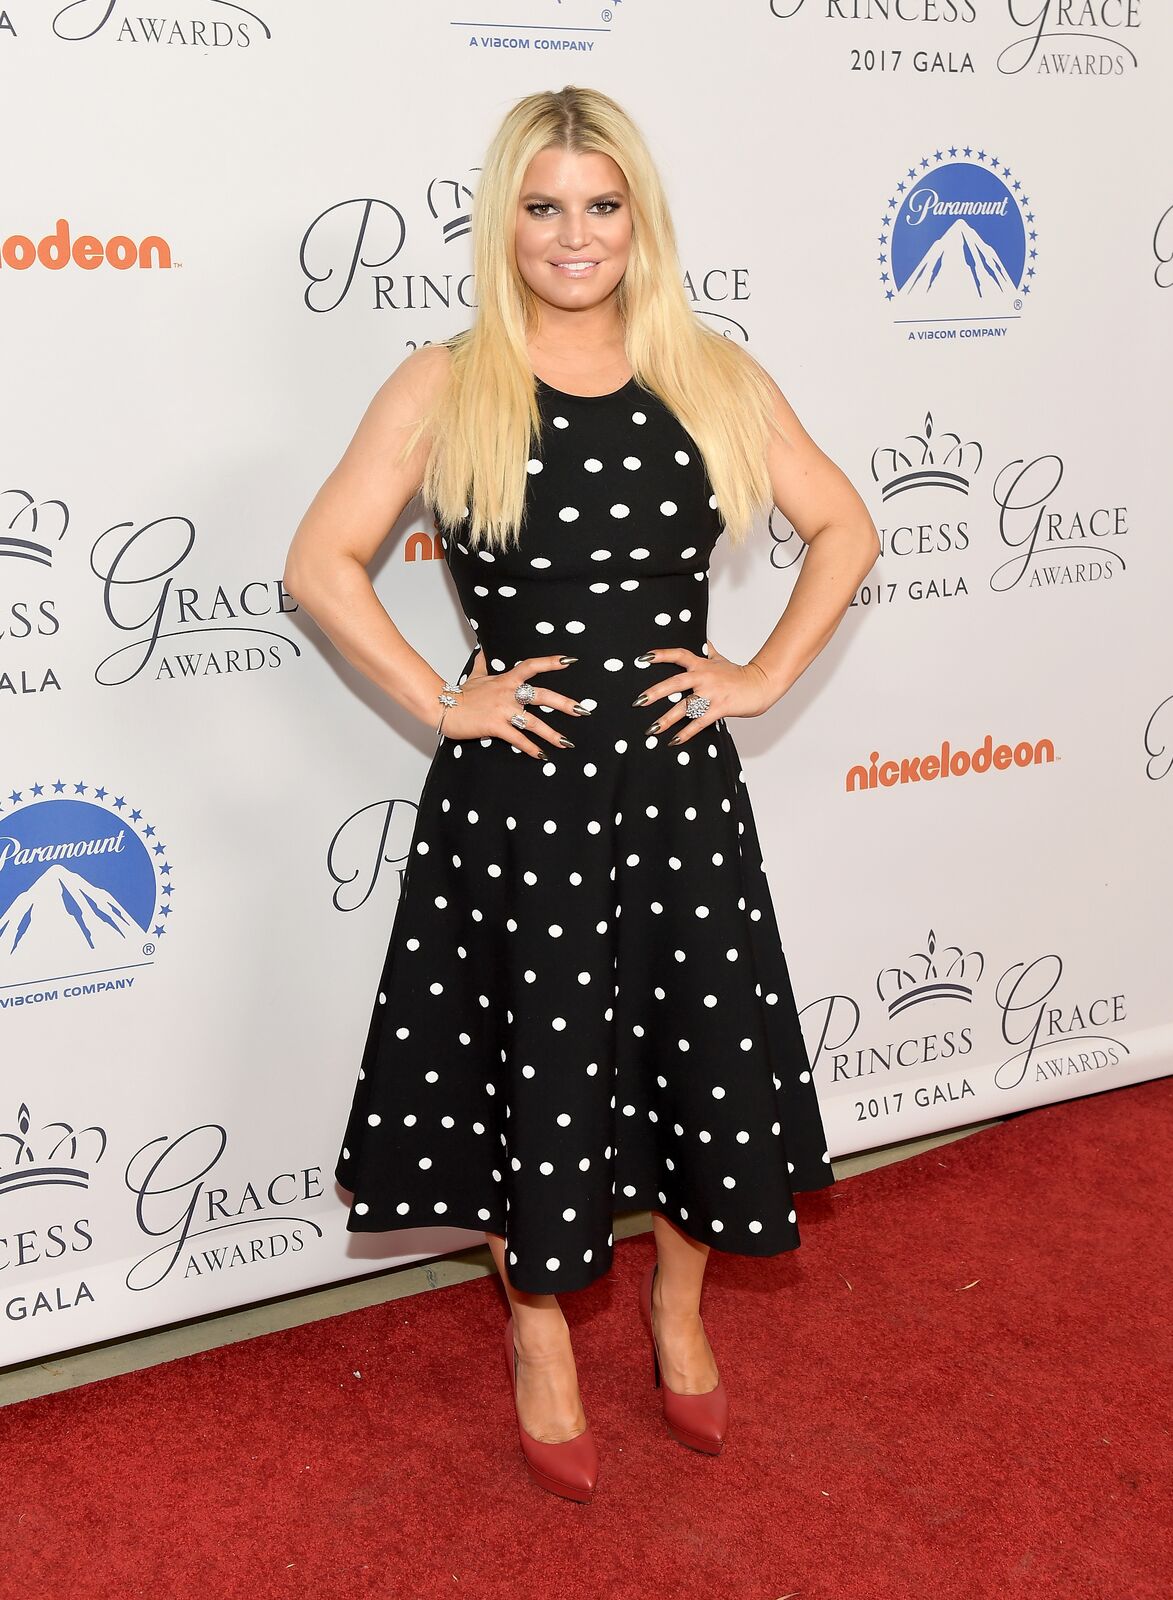 Jessica Simpson attends the 2017 Princess Grace Awards Gala Kick Off Event with a special tribute to Stephen Hillenberg at Paramount Studios on October 24, 2017 in Hollywood, California | Photo: Getty Images